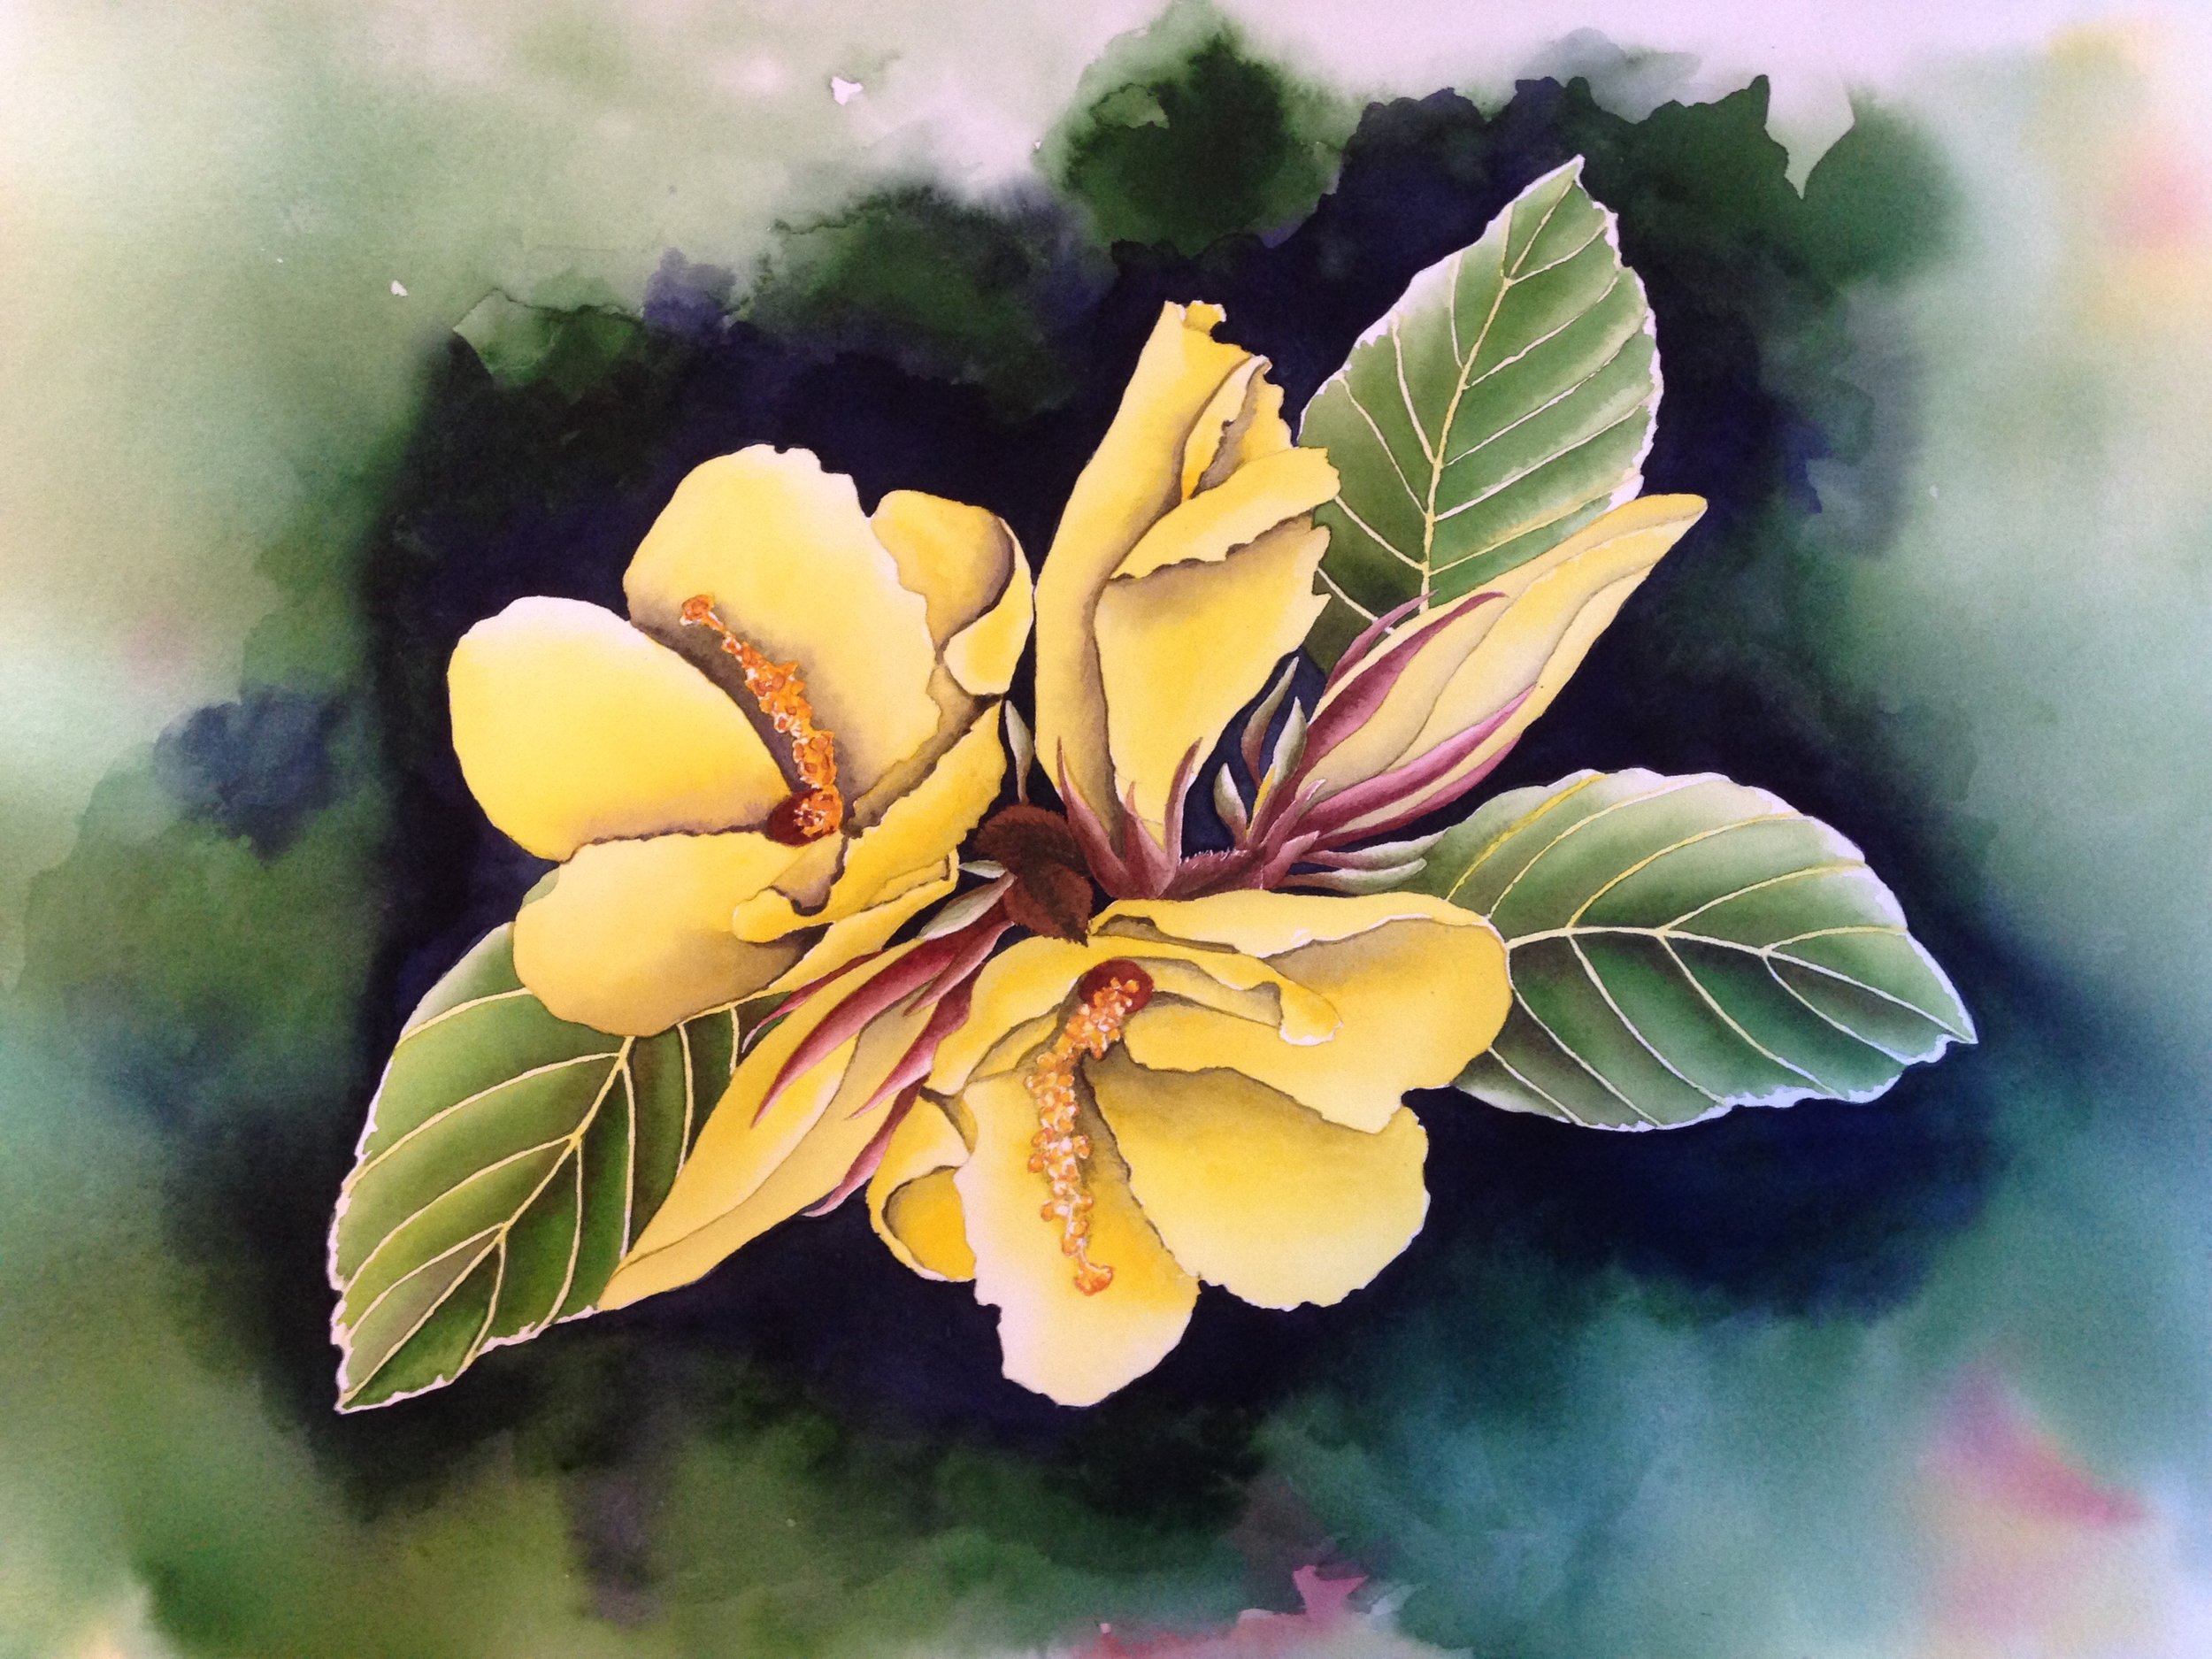   Ma‘o Hau Hele   Hibiscus brackenridgei   The Ma‘o Hau Hele &nbsp; inhabits dry forest and shrubland and is endemic to all of the main Hawaiian Islands. It has five yellow petals, with a touch of maroon at their base,&nbsp;and a “clustered” yellow s